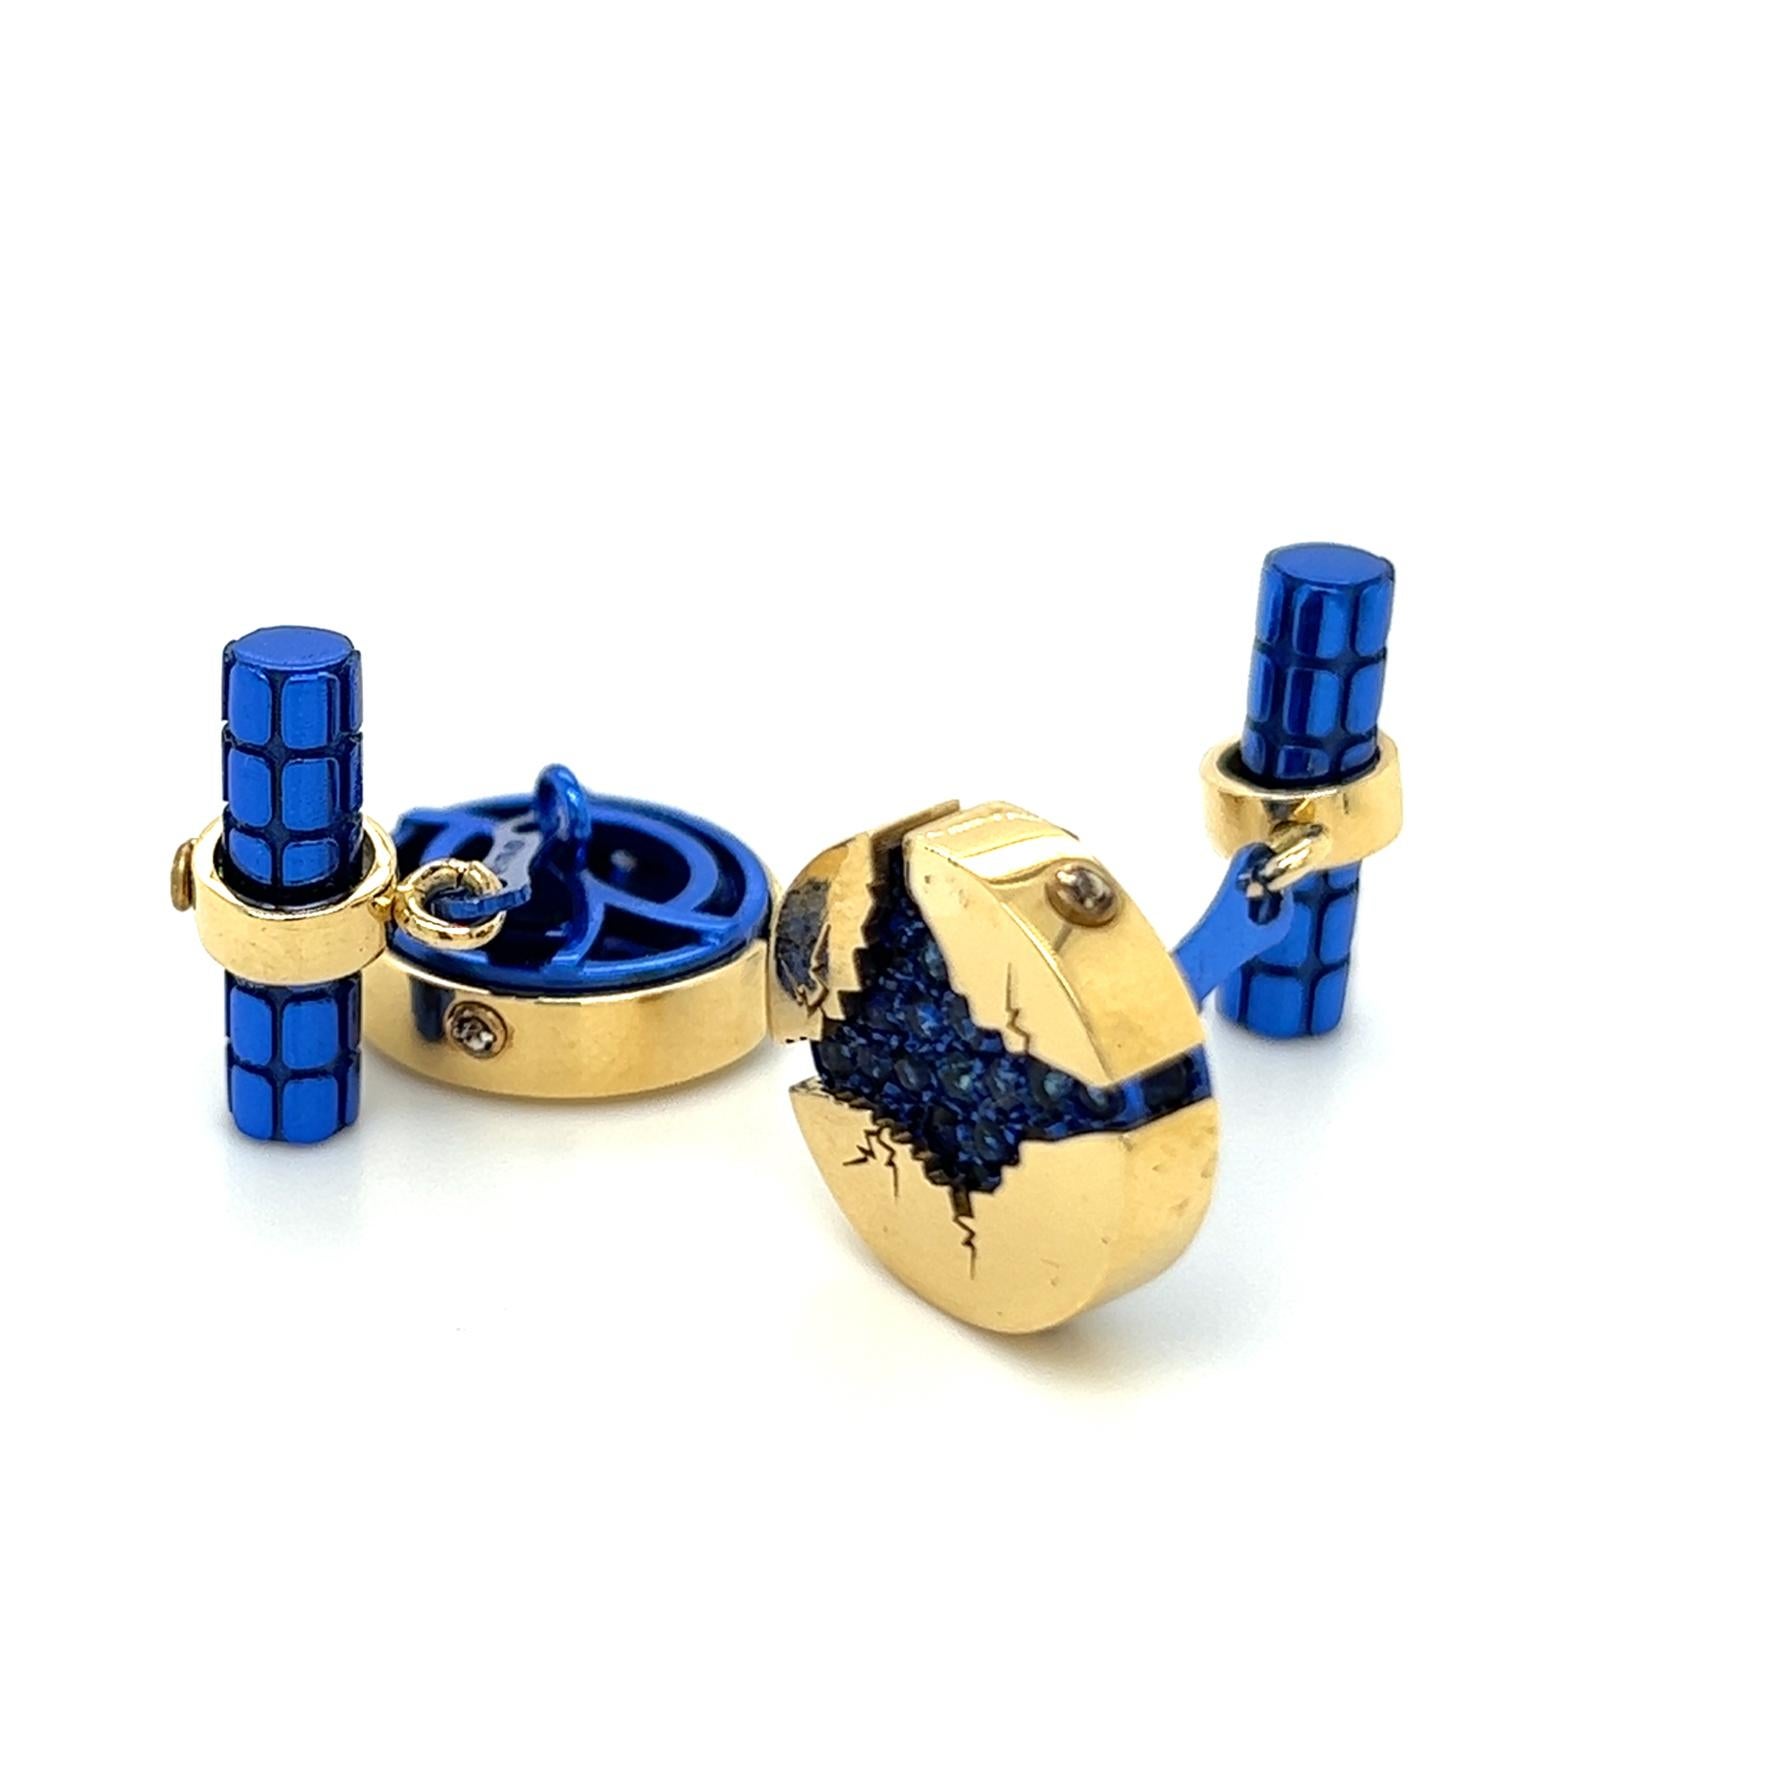 Brilliant Cut Berca 1.25 Carat Natural Blue Sapphire Oxydized Navy Blue Yellow Gold Cufflinks For Sale